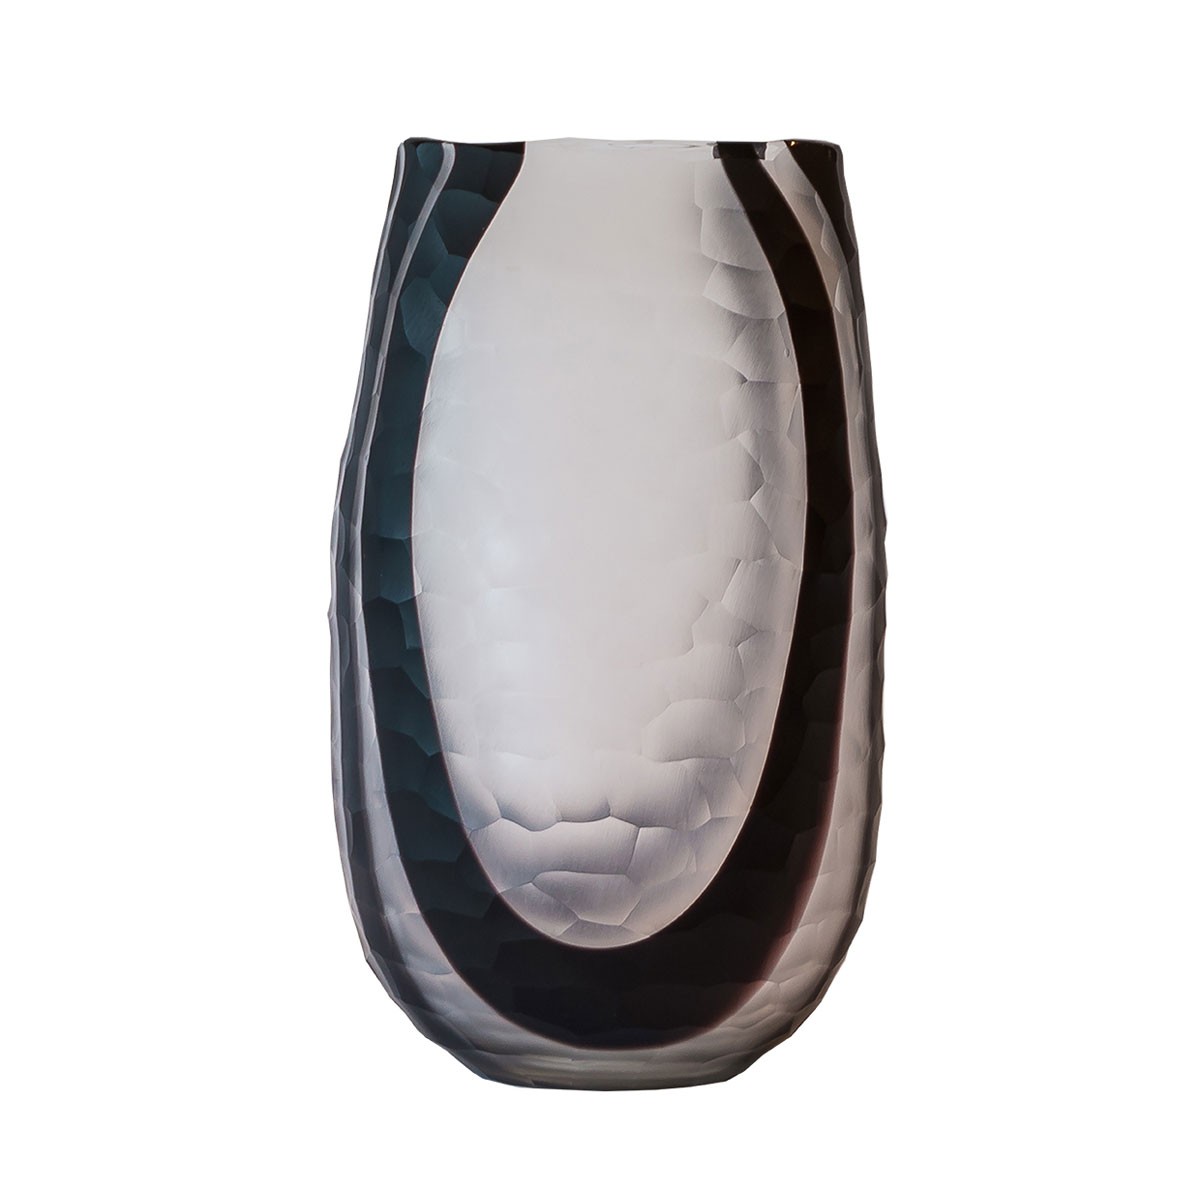 Crust - Black and White Patterned Glass Vase